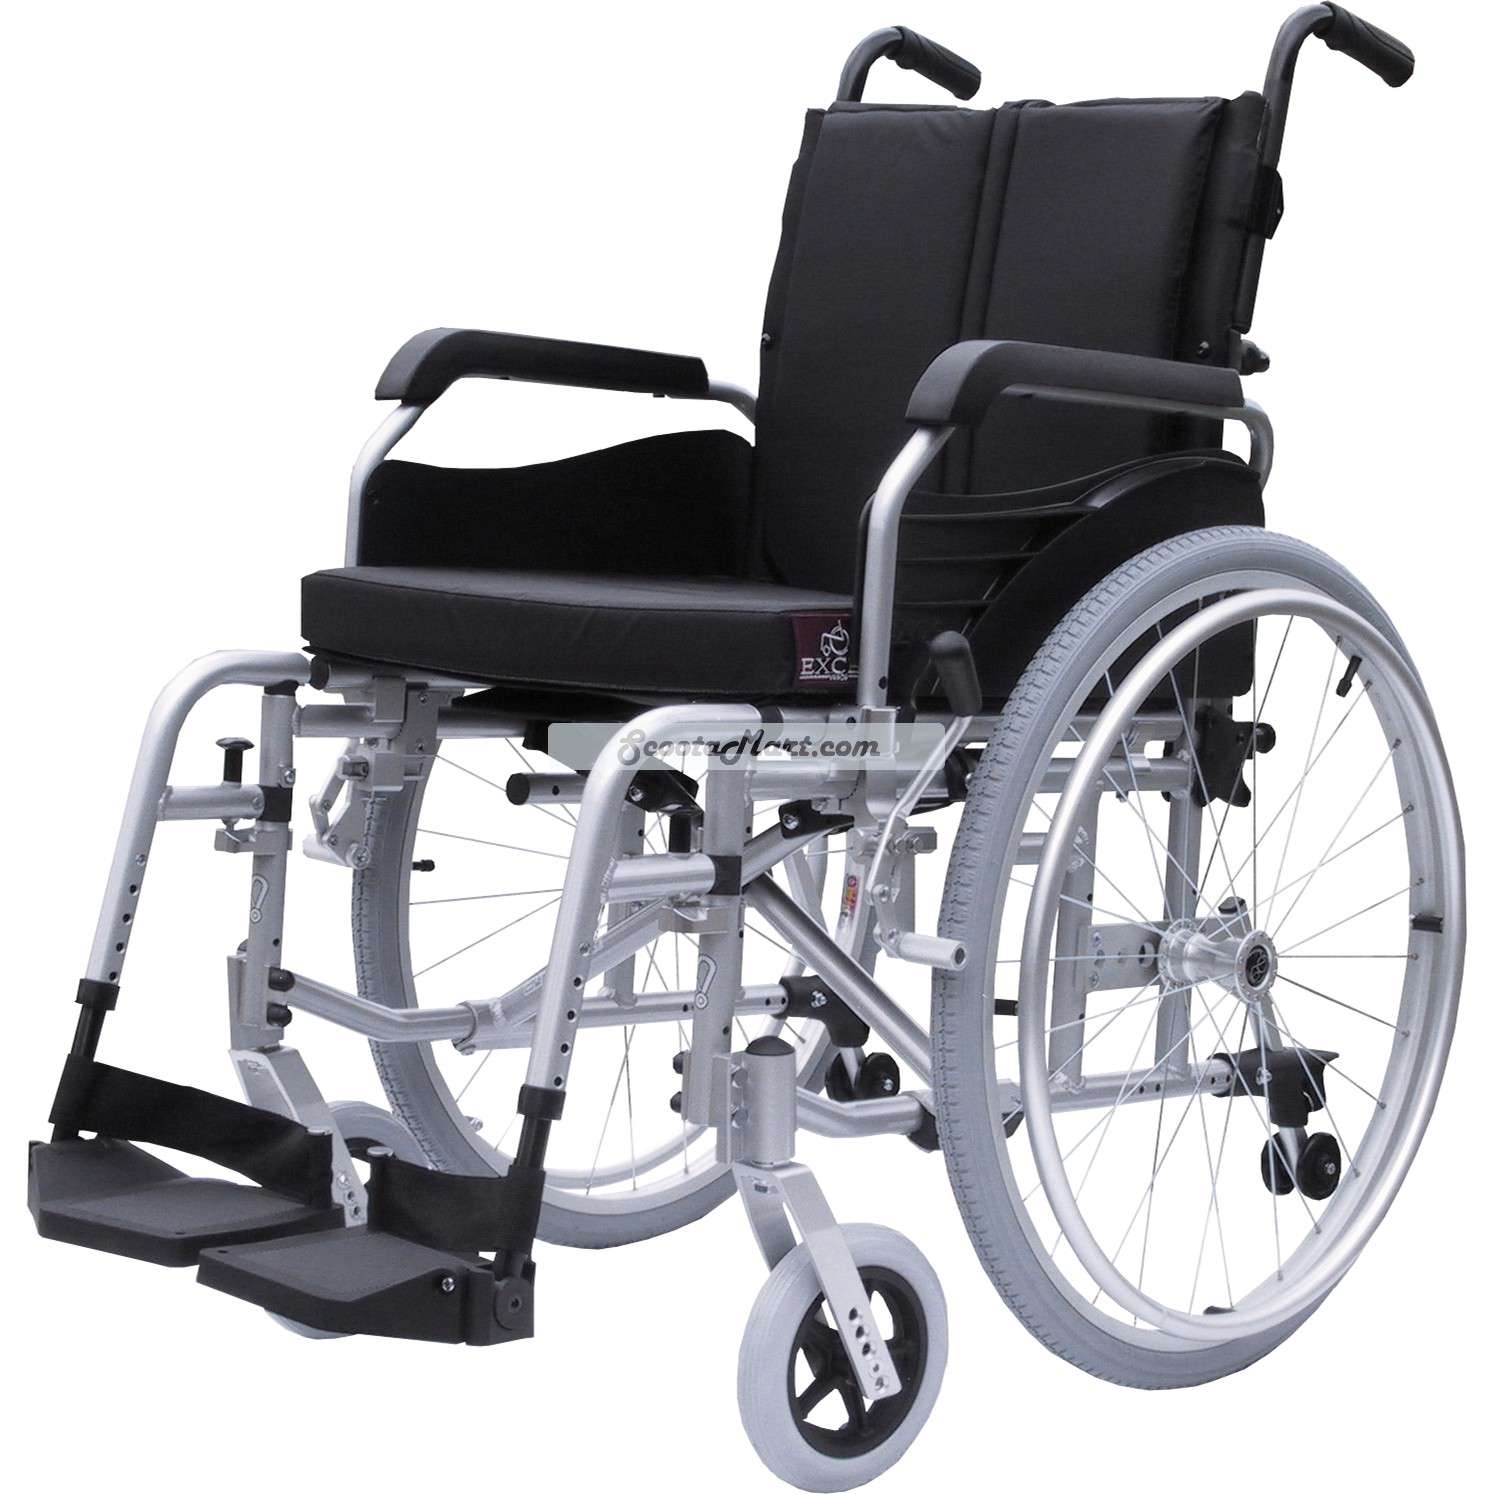 We Service Non-Electric Wheelchairs - Breakaway Cycling : Delaware, OH